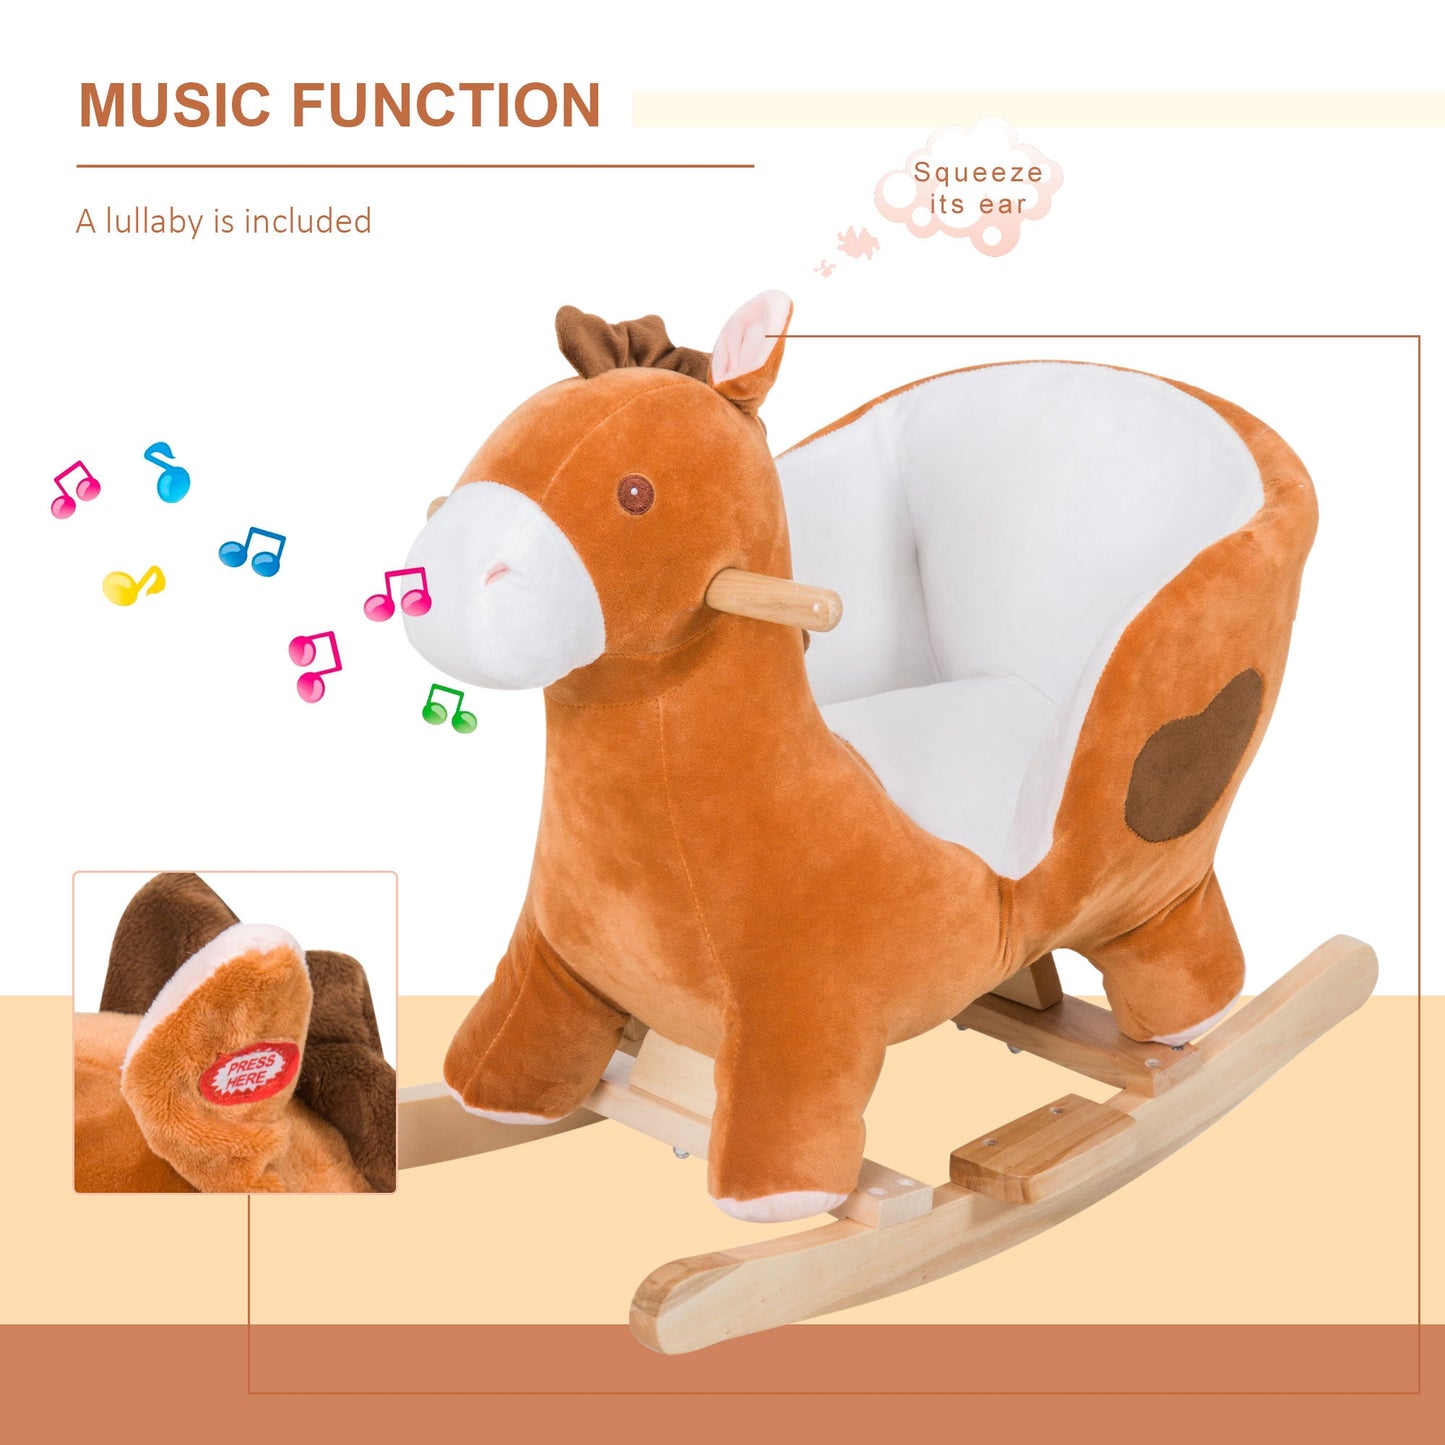 Kids Plush Rocking Horse Stuffed Animal Rocker Child Ride On Toy with Realistic Sound Red Brown at Gallery Canada